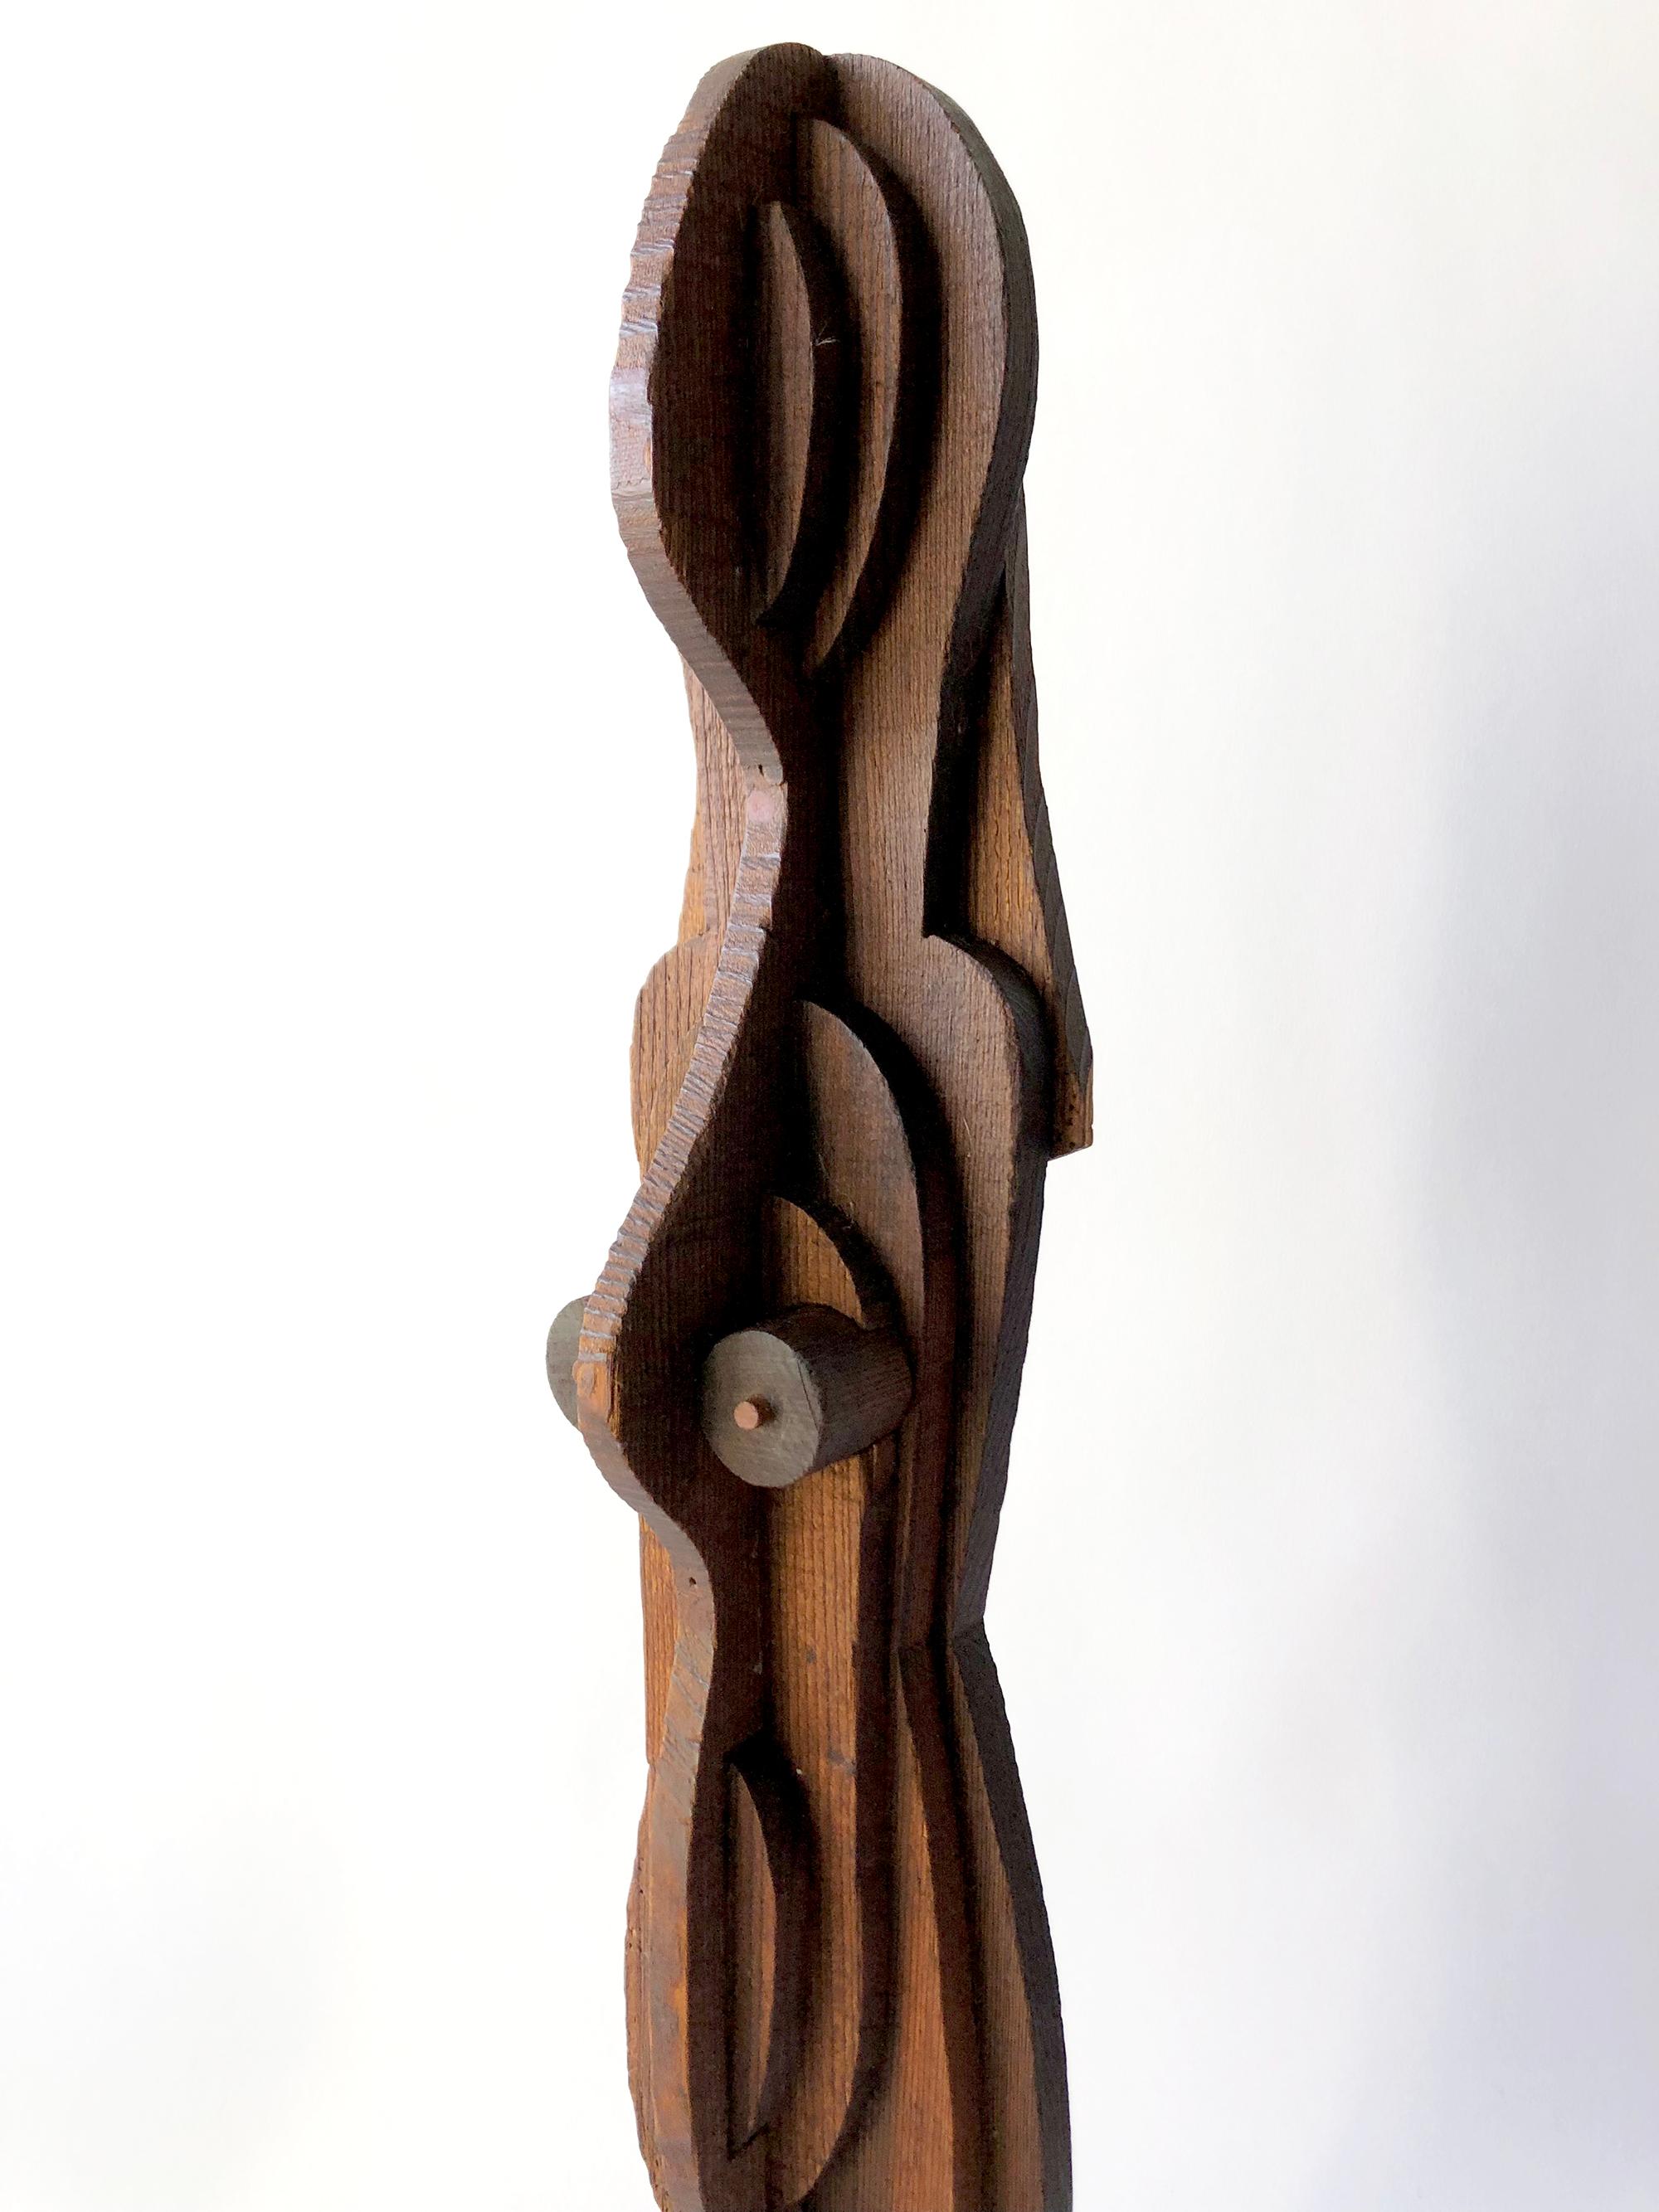 1970s abstract dimensional layered wood female sculpture in the style of Ernest Trova. Sculpture measures 24